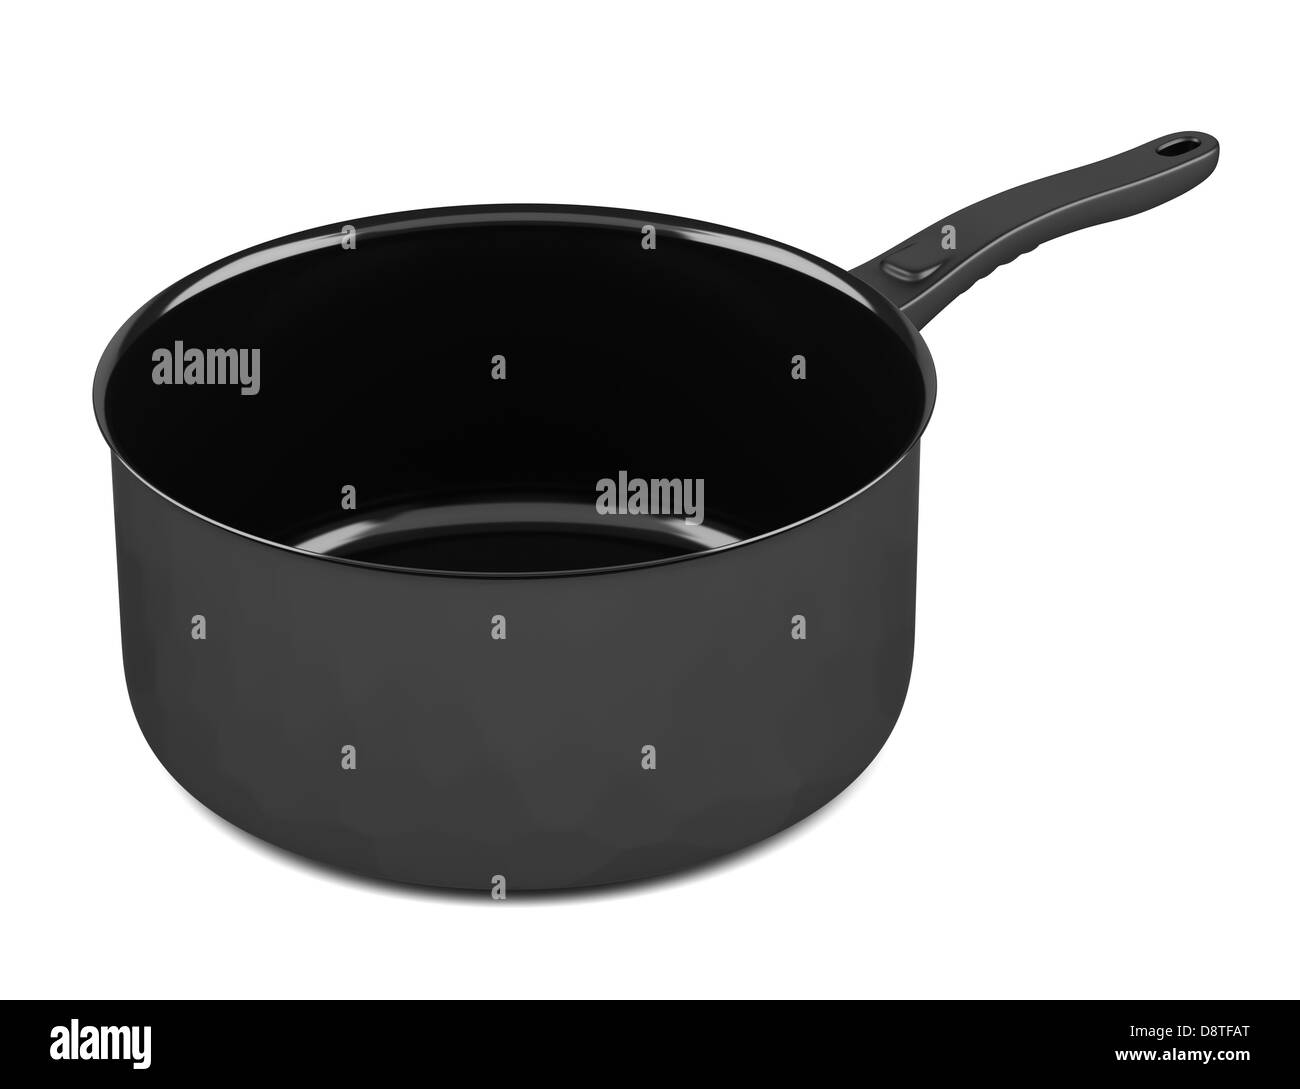 single black cooking pot isolated on white Stock Photo